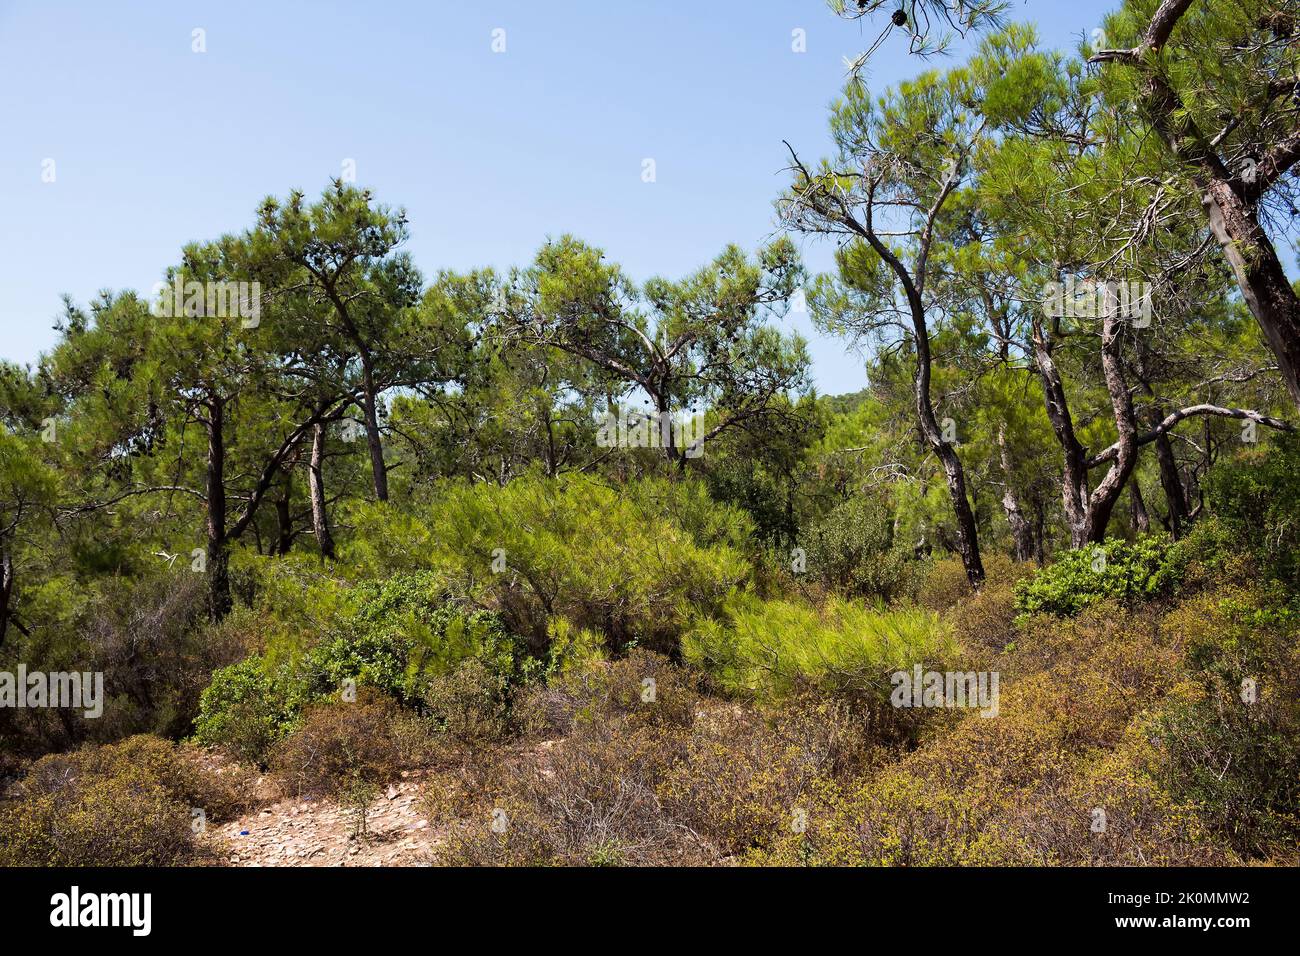 View of pine trees called Pinus Brutia and wild plants captured in Aegean coast of Turkey. It is a sunny summer day. Stock Photo